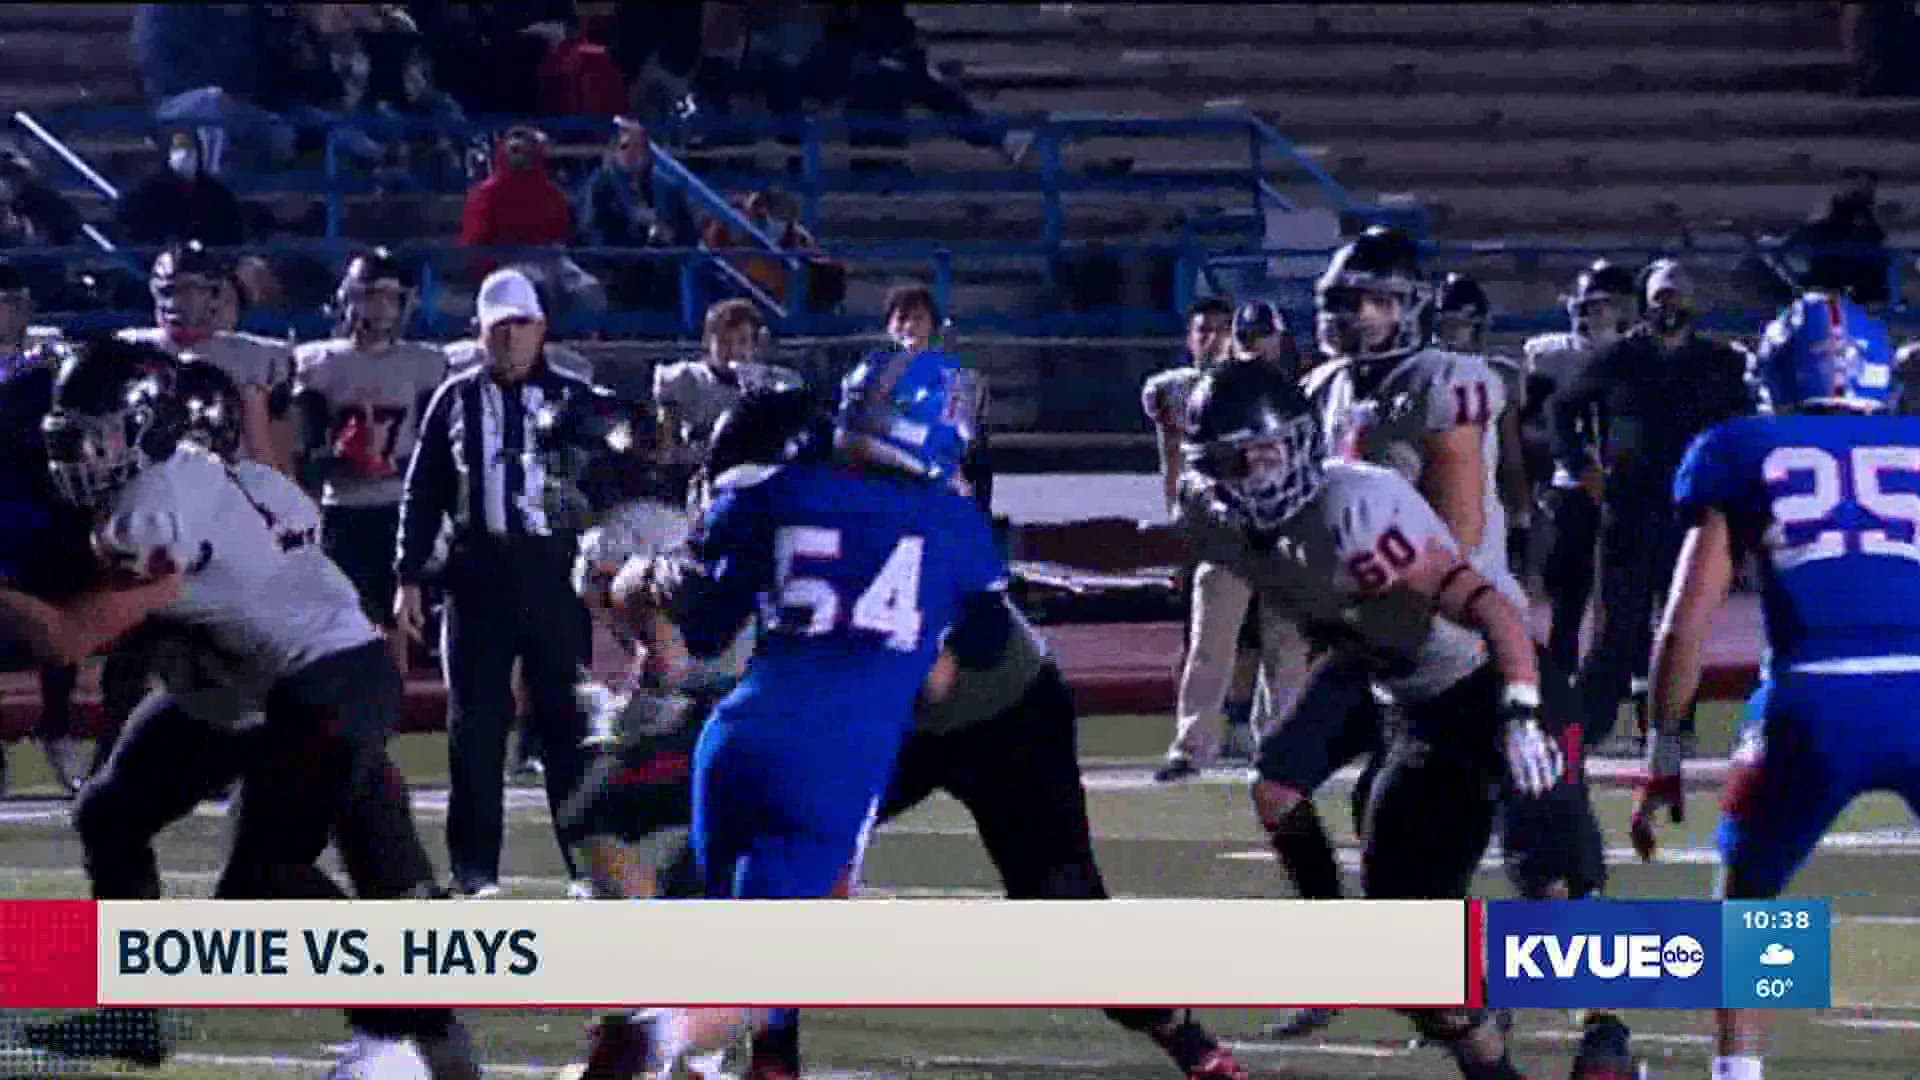 Our Friday Football Fever Games of the Week this week are Del Valle vs. Austin High and Bowie vs. Hays.